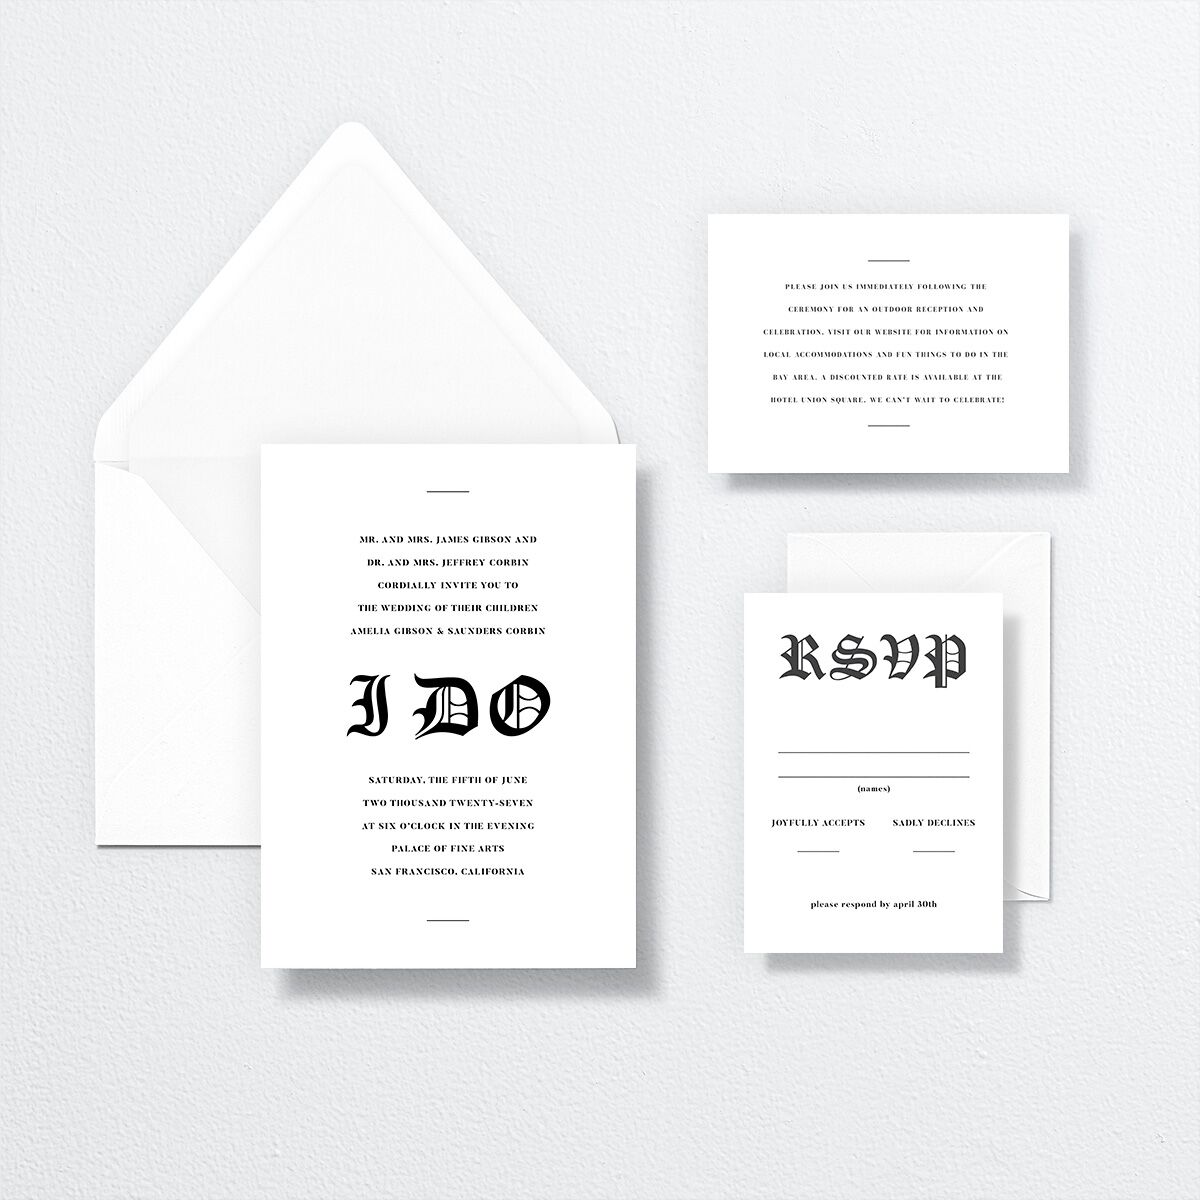 I Do Wedding Invitations by Vera Wang suite in white